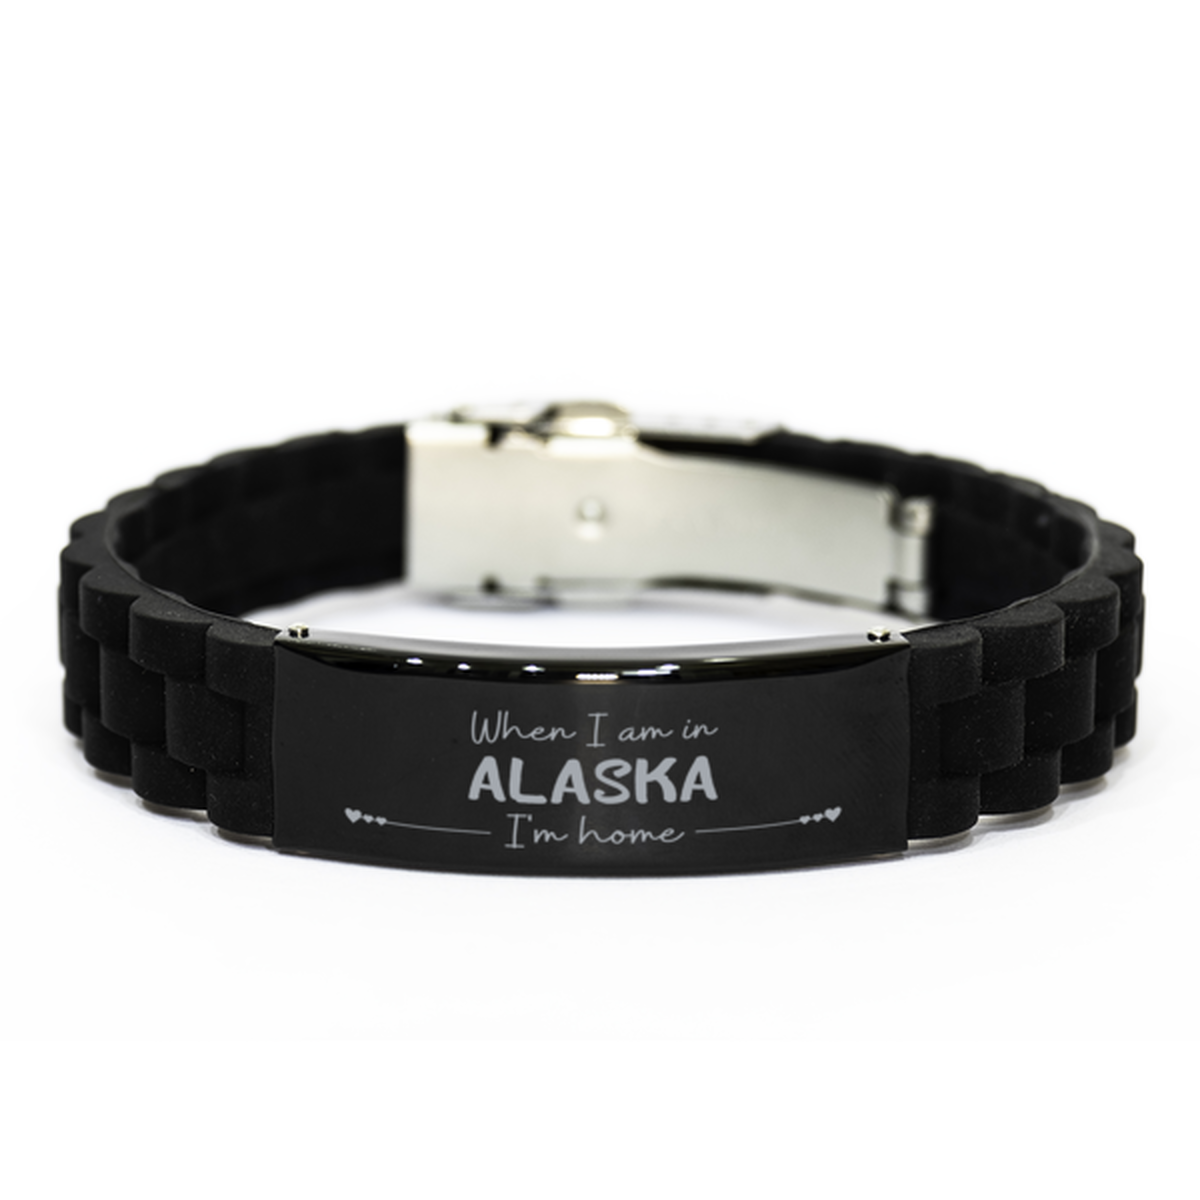 When I am in Alaska I'm home Black Glidelock Clasp Bracelet, Cheap Gifts For Alaska, State Alaska Birthday Gifts for Friends Coworker